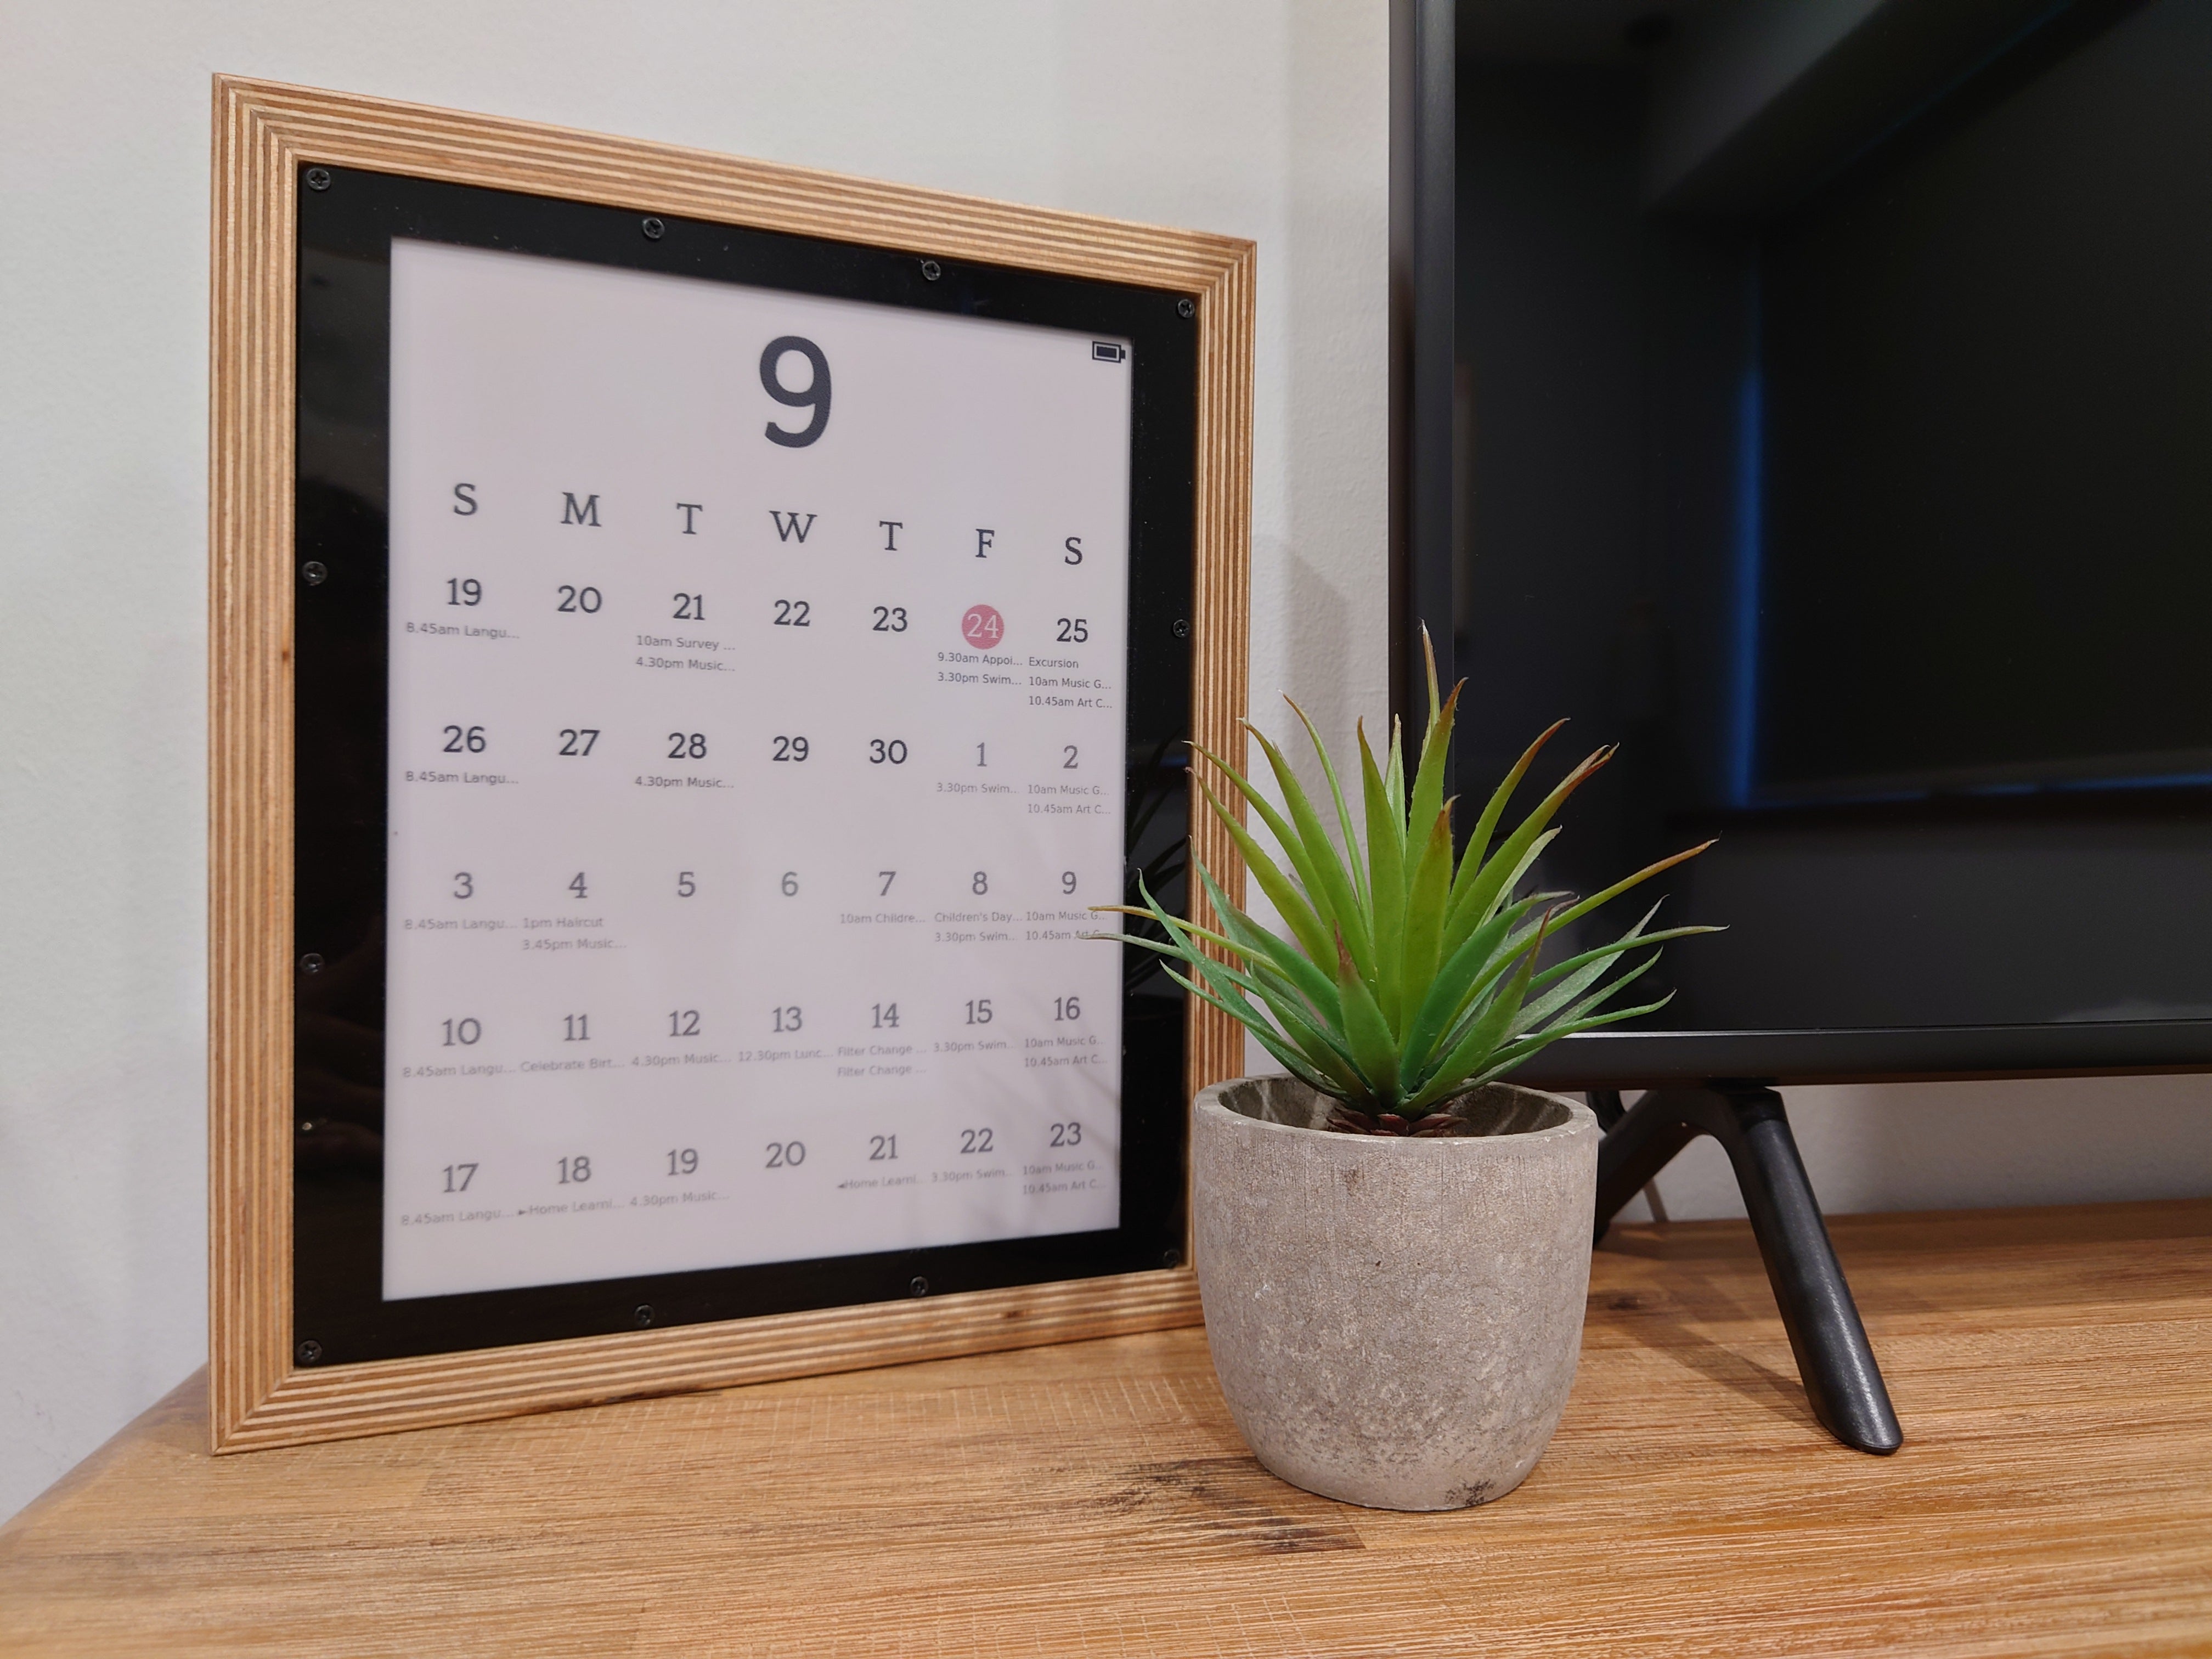 MagInkCal syncs your Google calendar with a framable e ink display